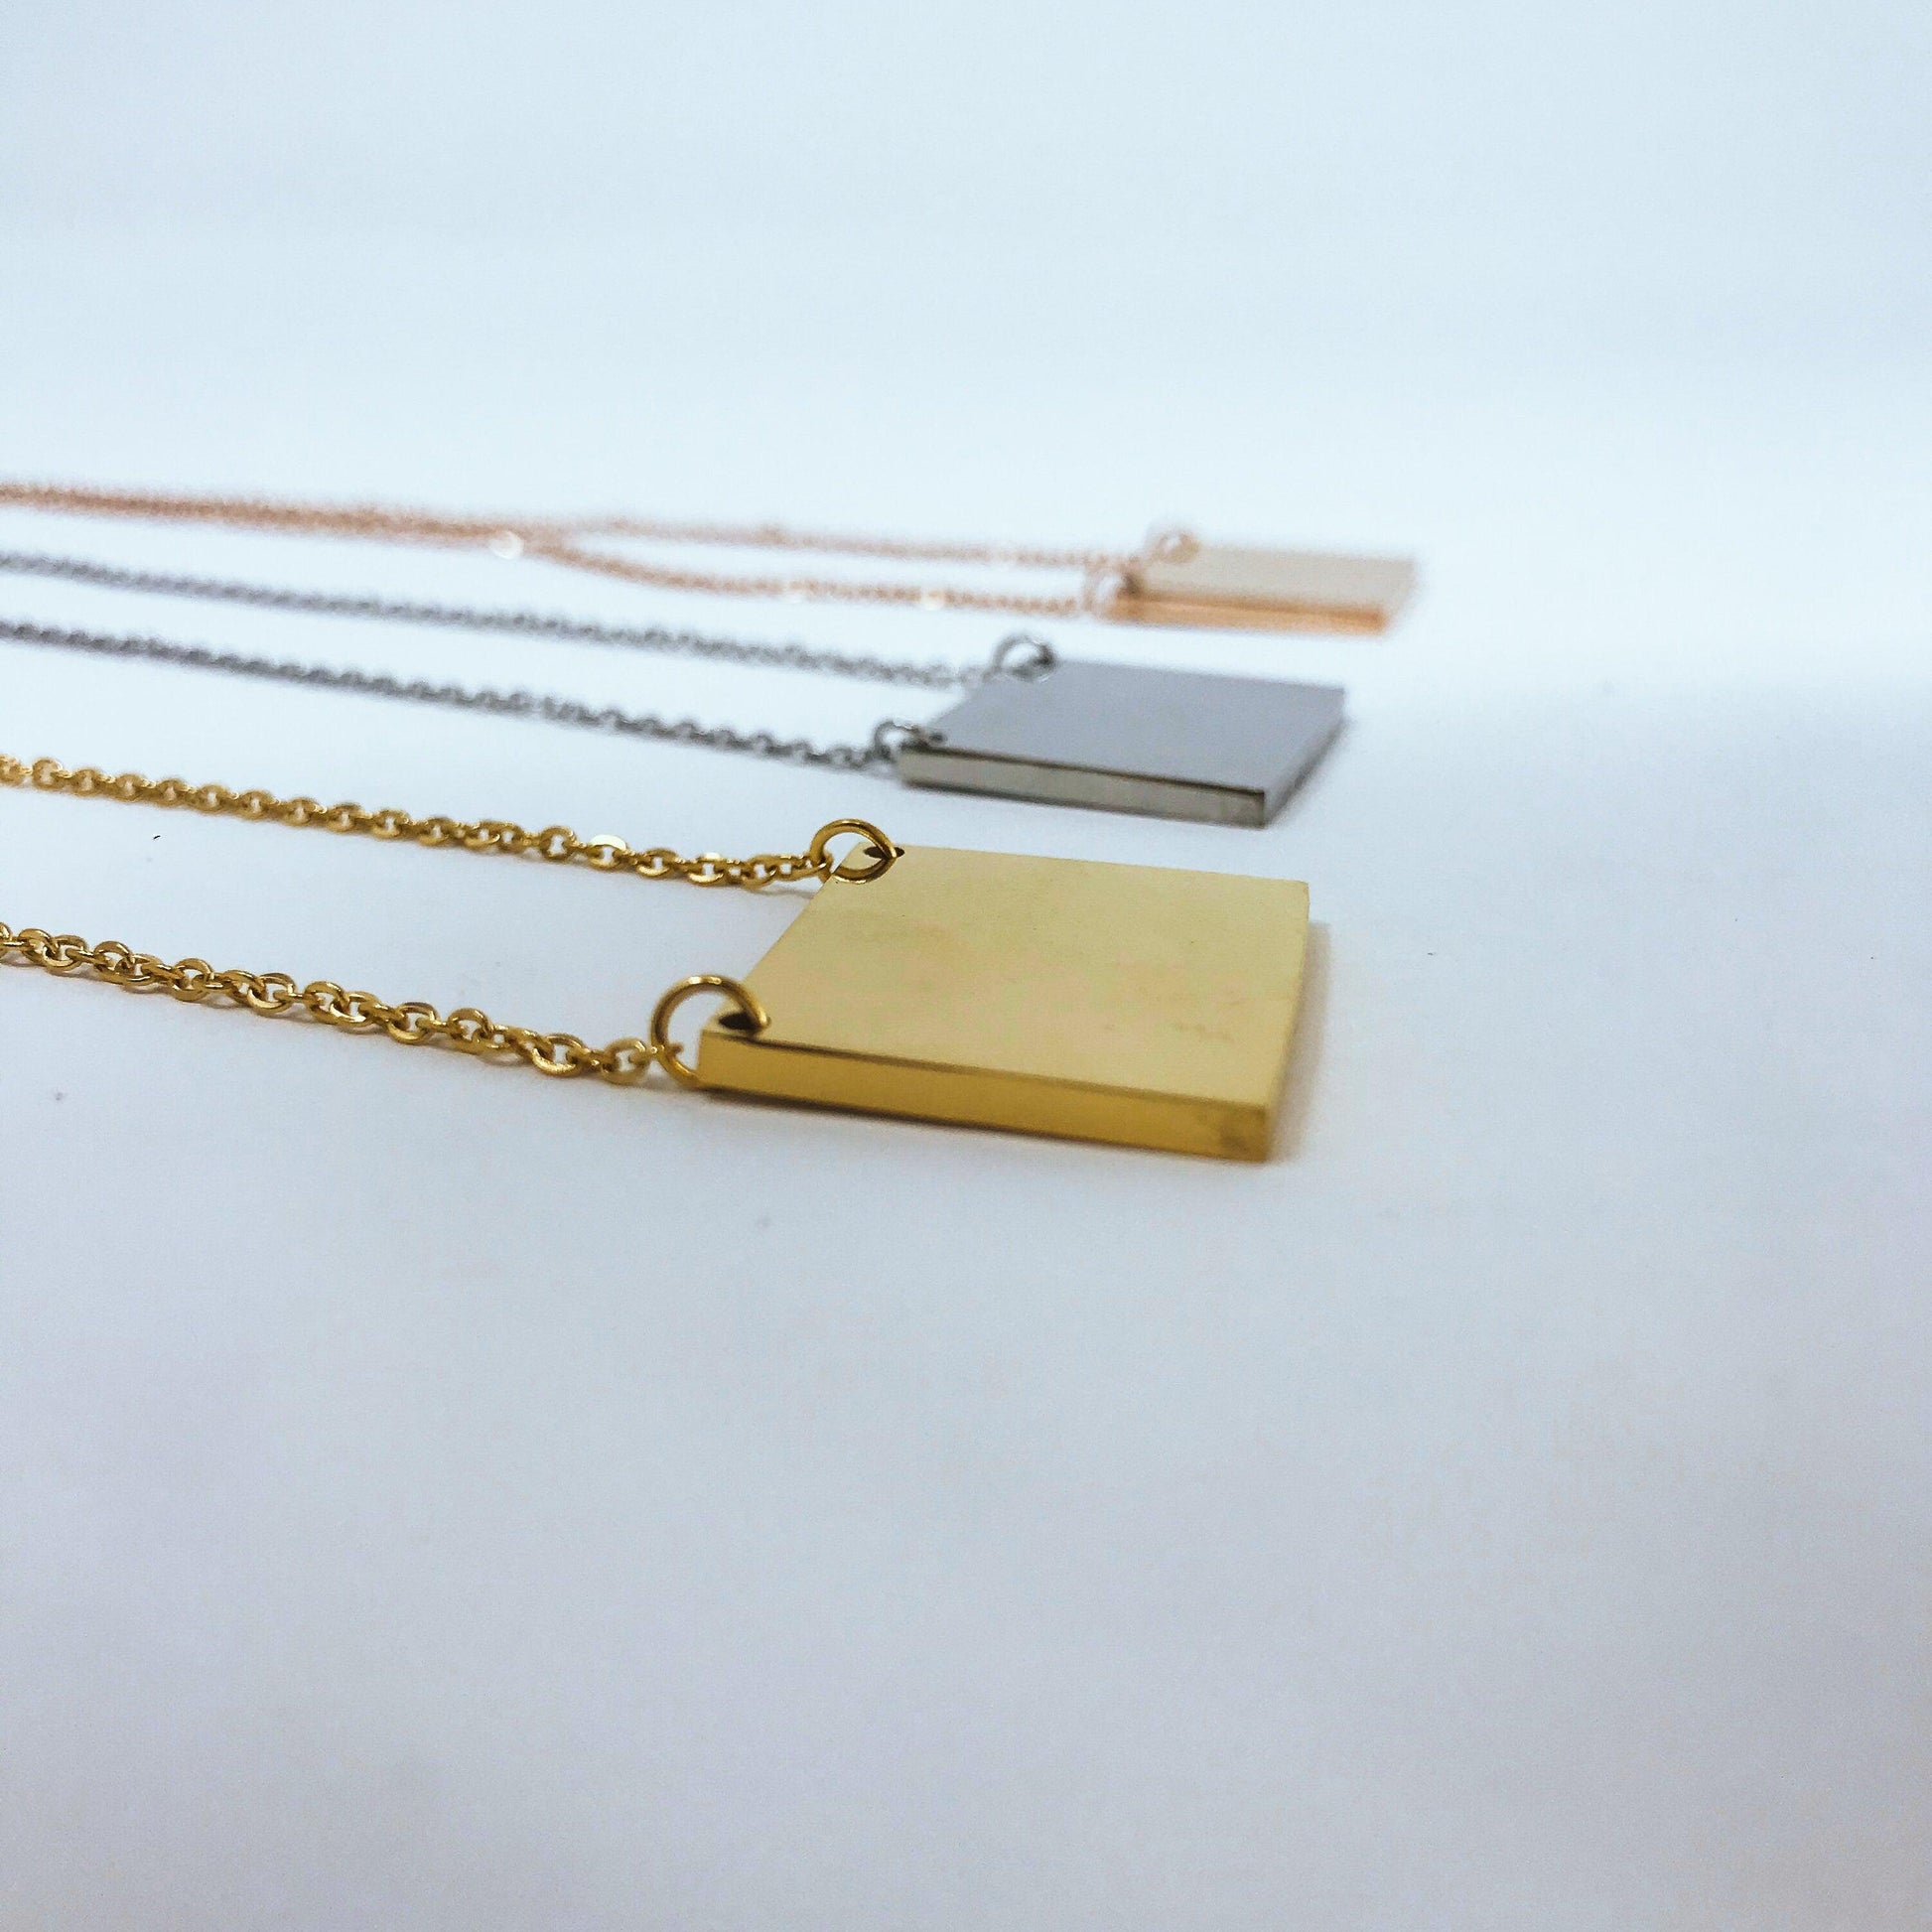 Colorado State Silhouette Necklaces in 3 different colors: Gold, Silver & Rose Gold